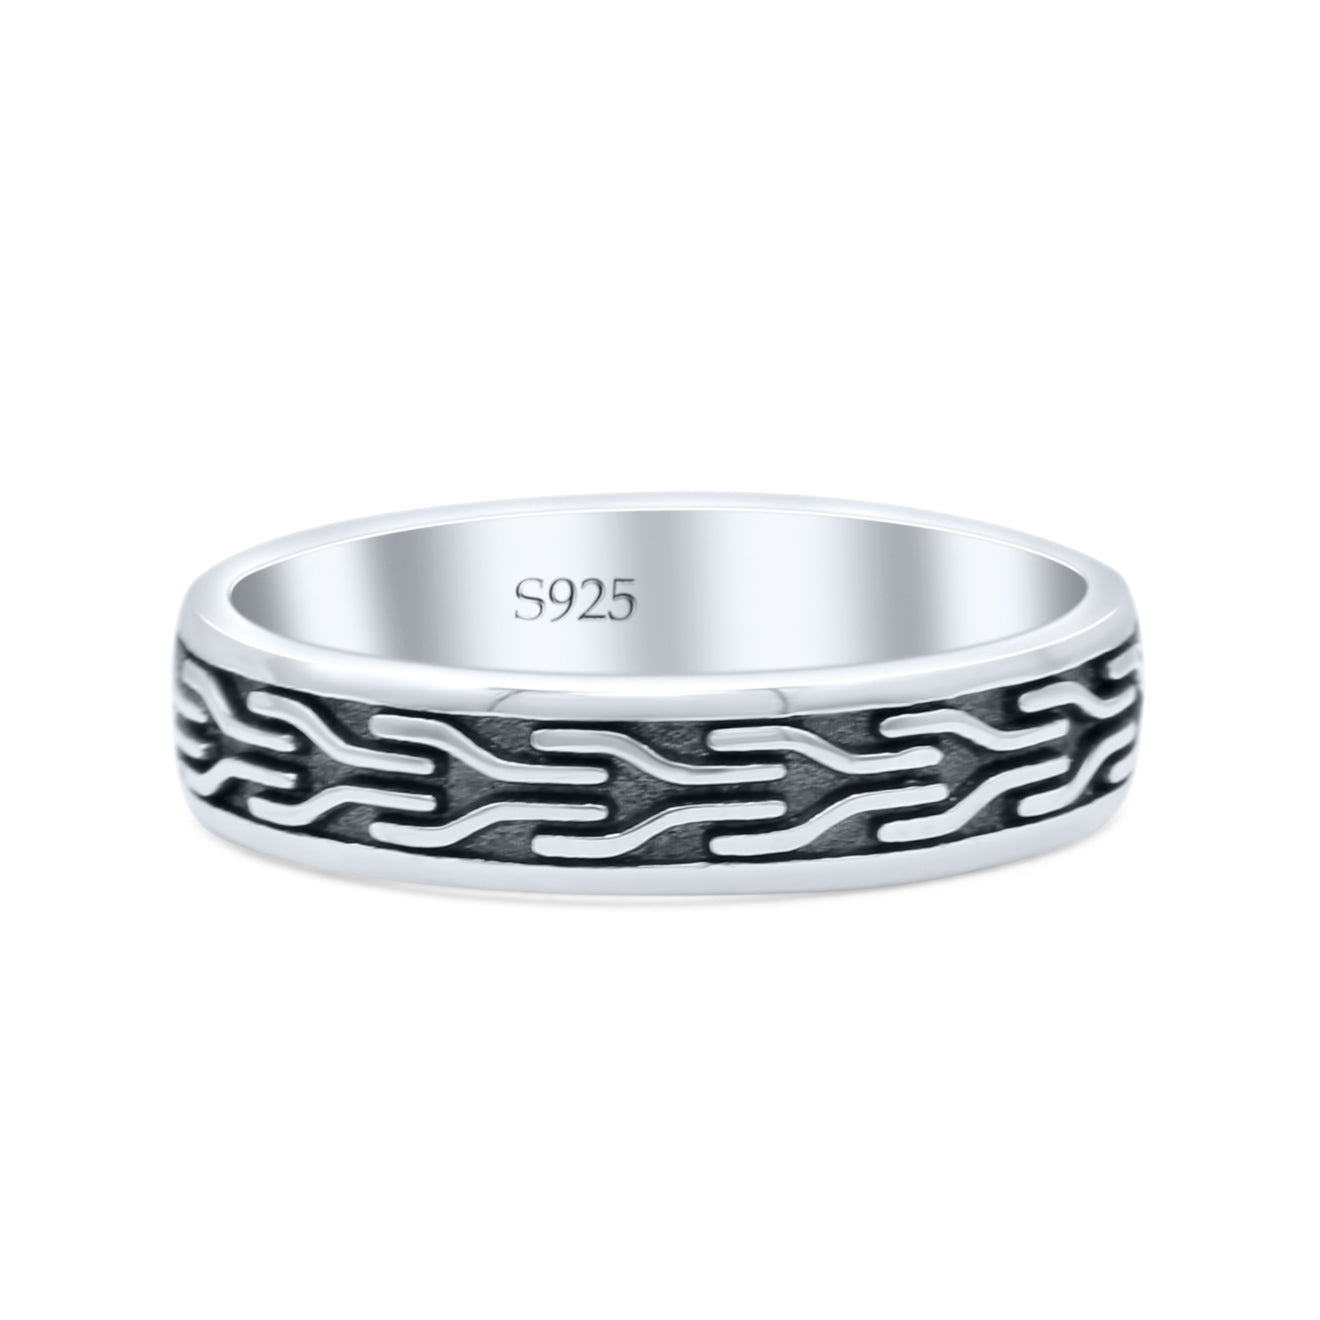 92.5 Silver Zebra Patterned Curved Mens Ring - Silver Palace